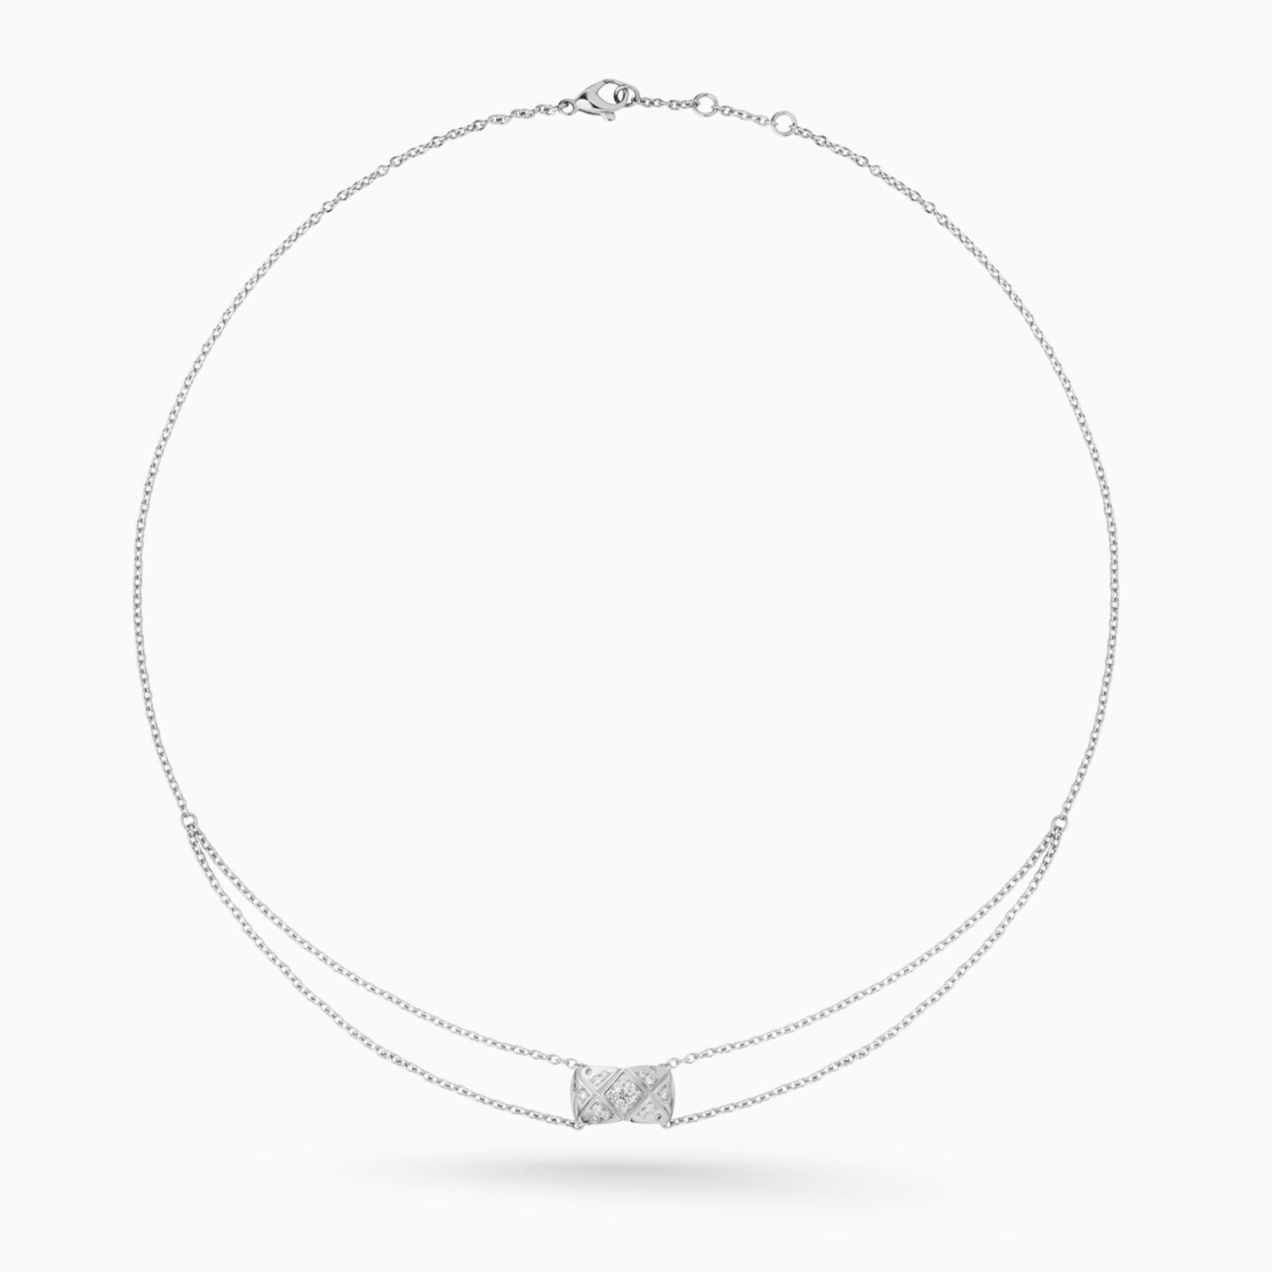 Necklace CHANEL Coco Crush white gold with diamonds